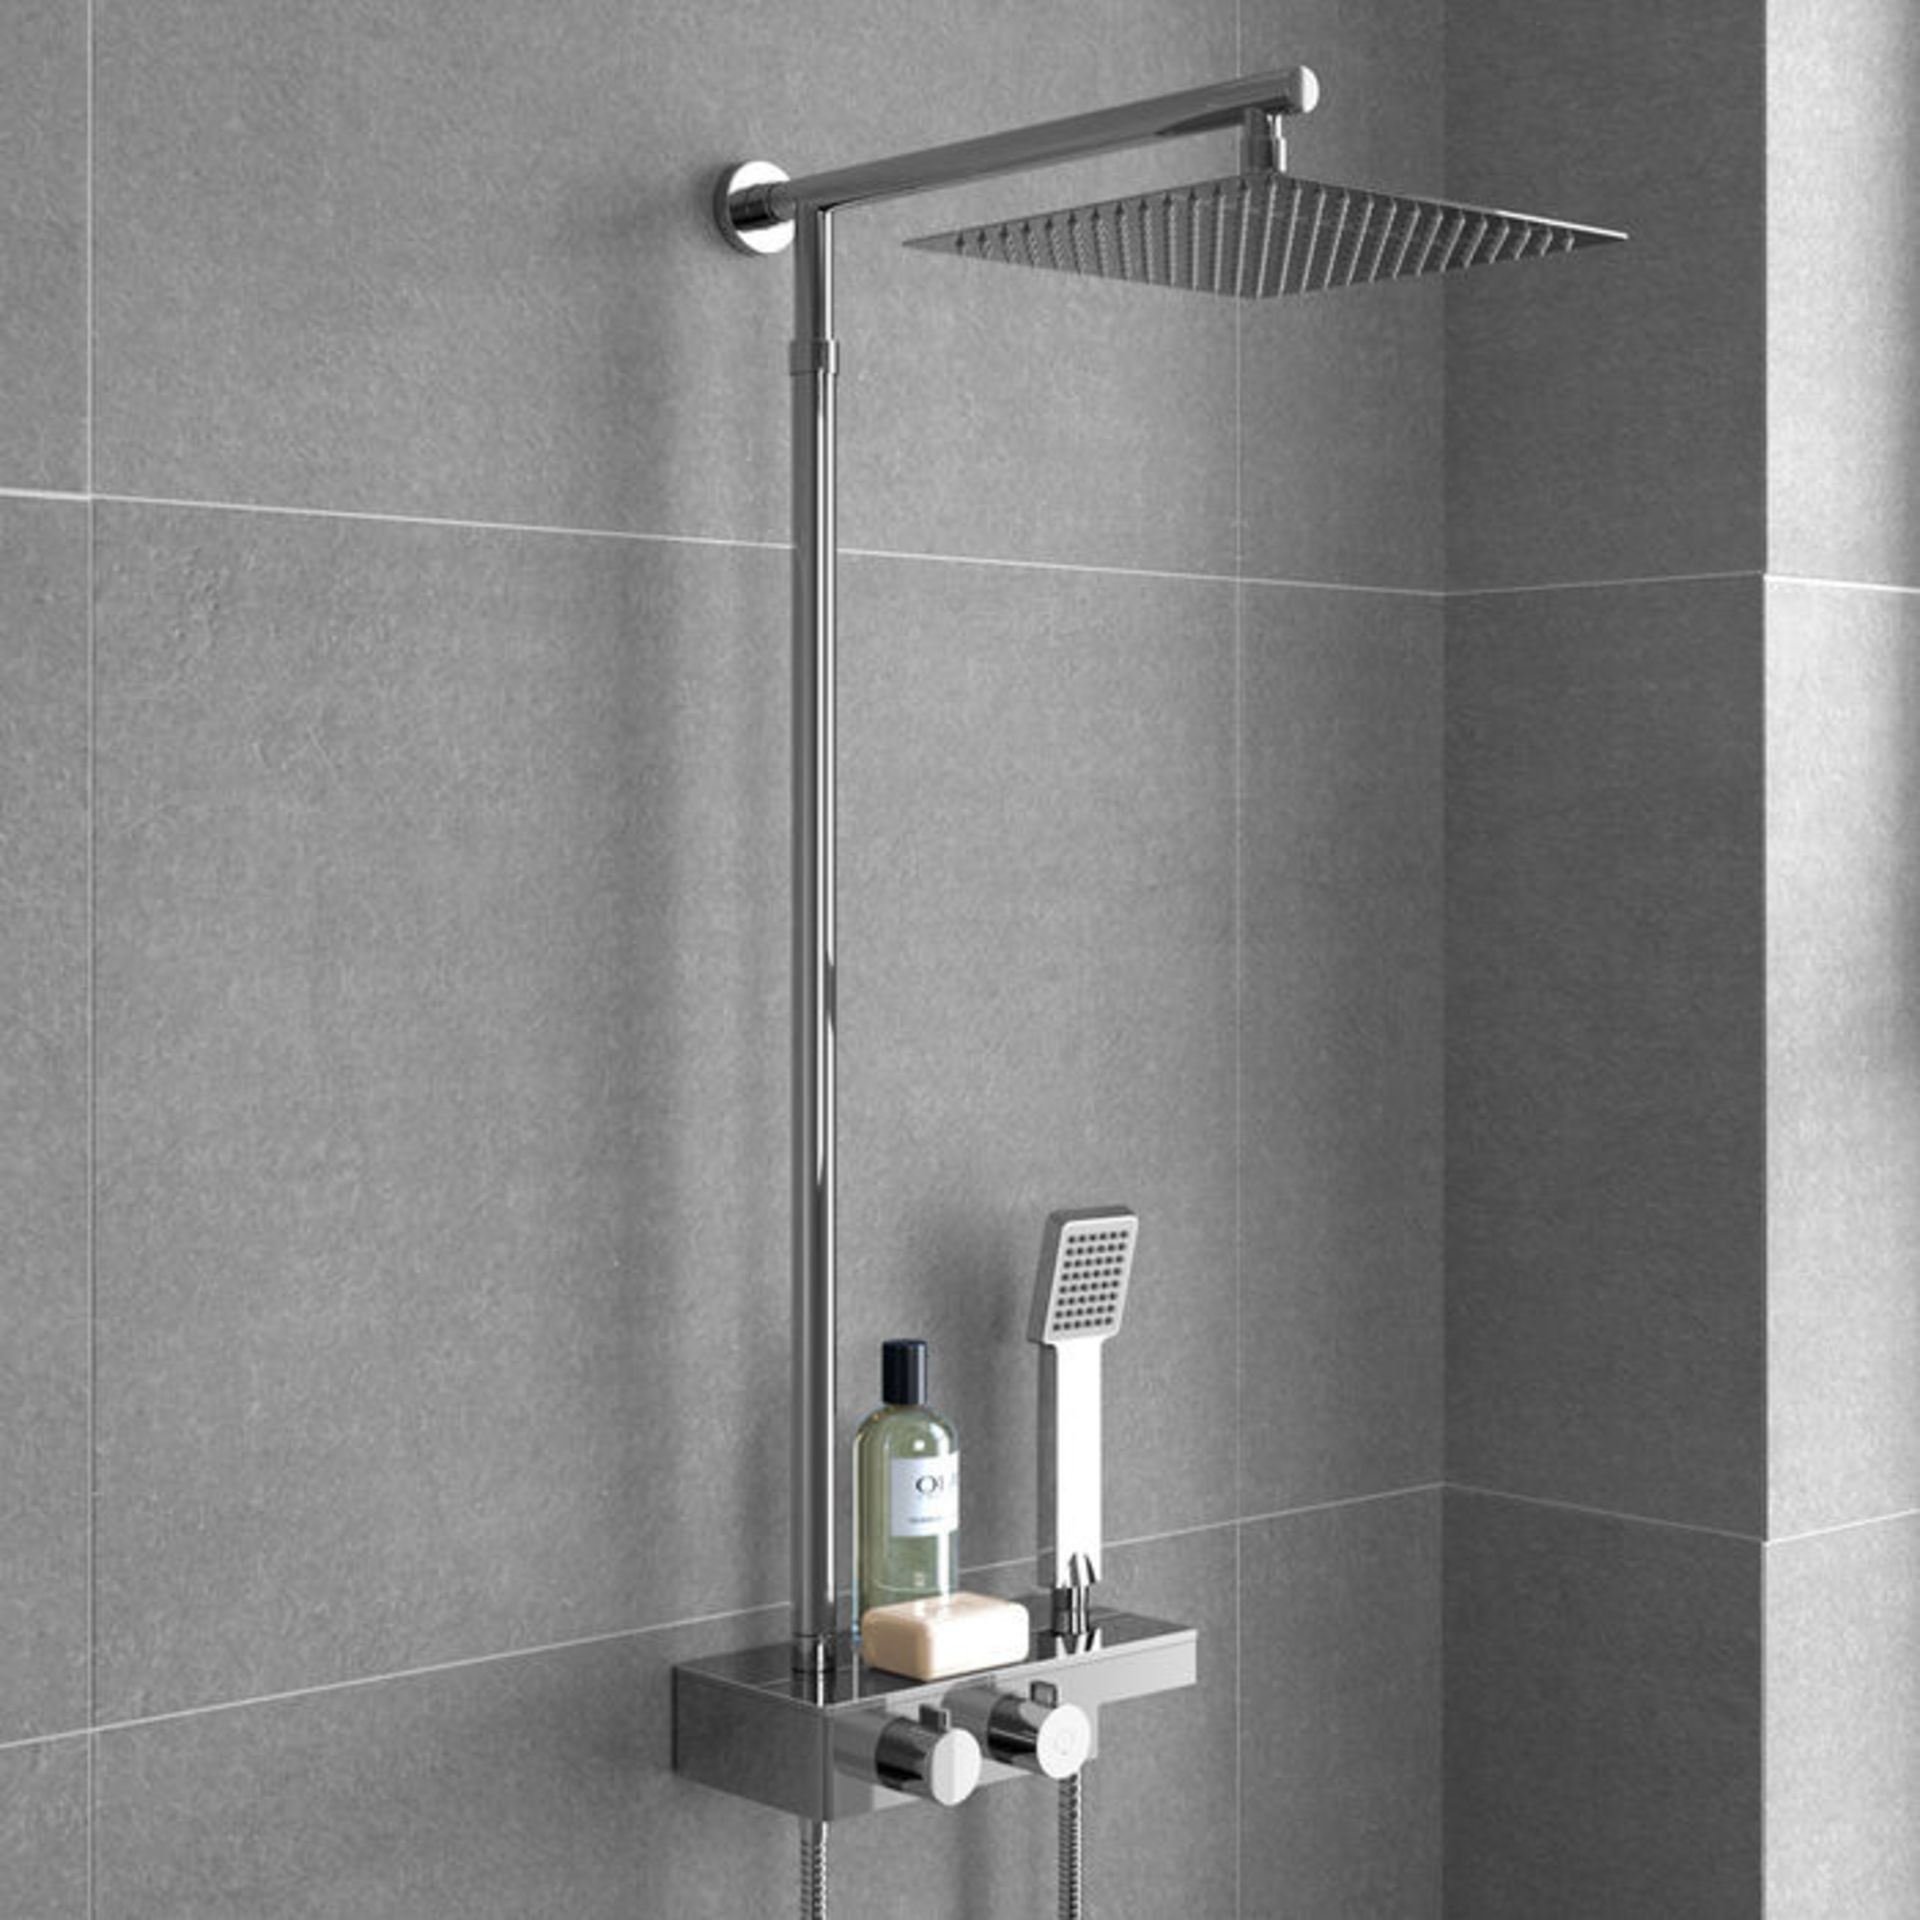 (J155) Thermostatic Exposed Shower Kit 250mm Square Head Handheld. We love this because it creates a - Image 3 of 3